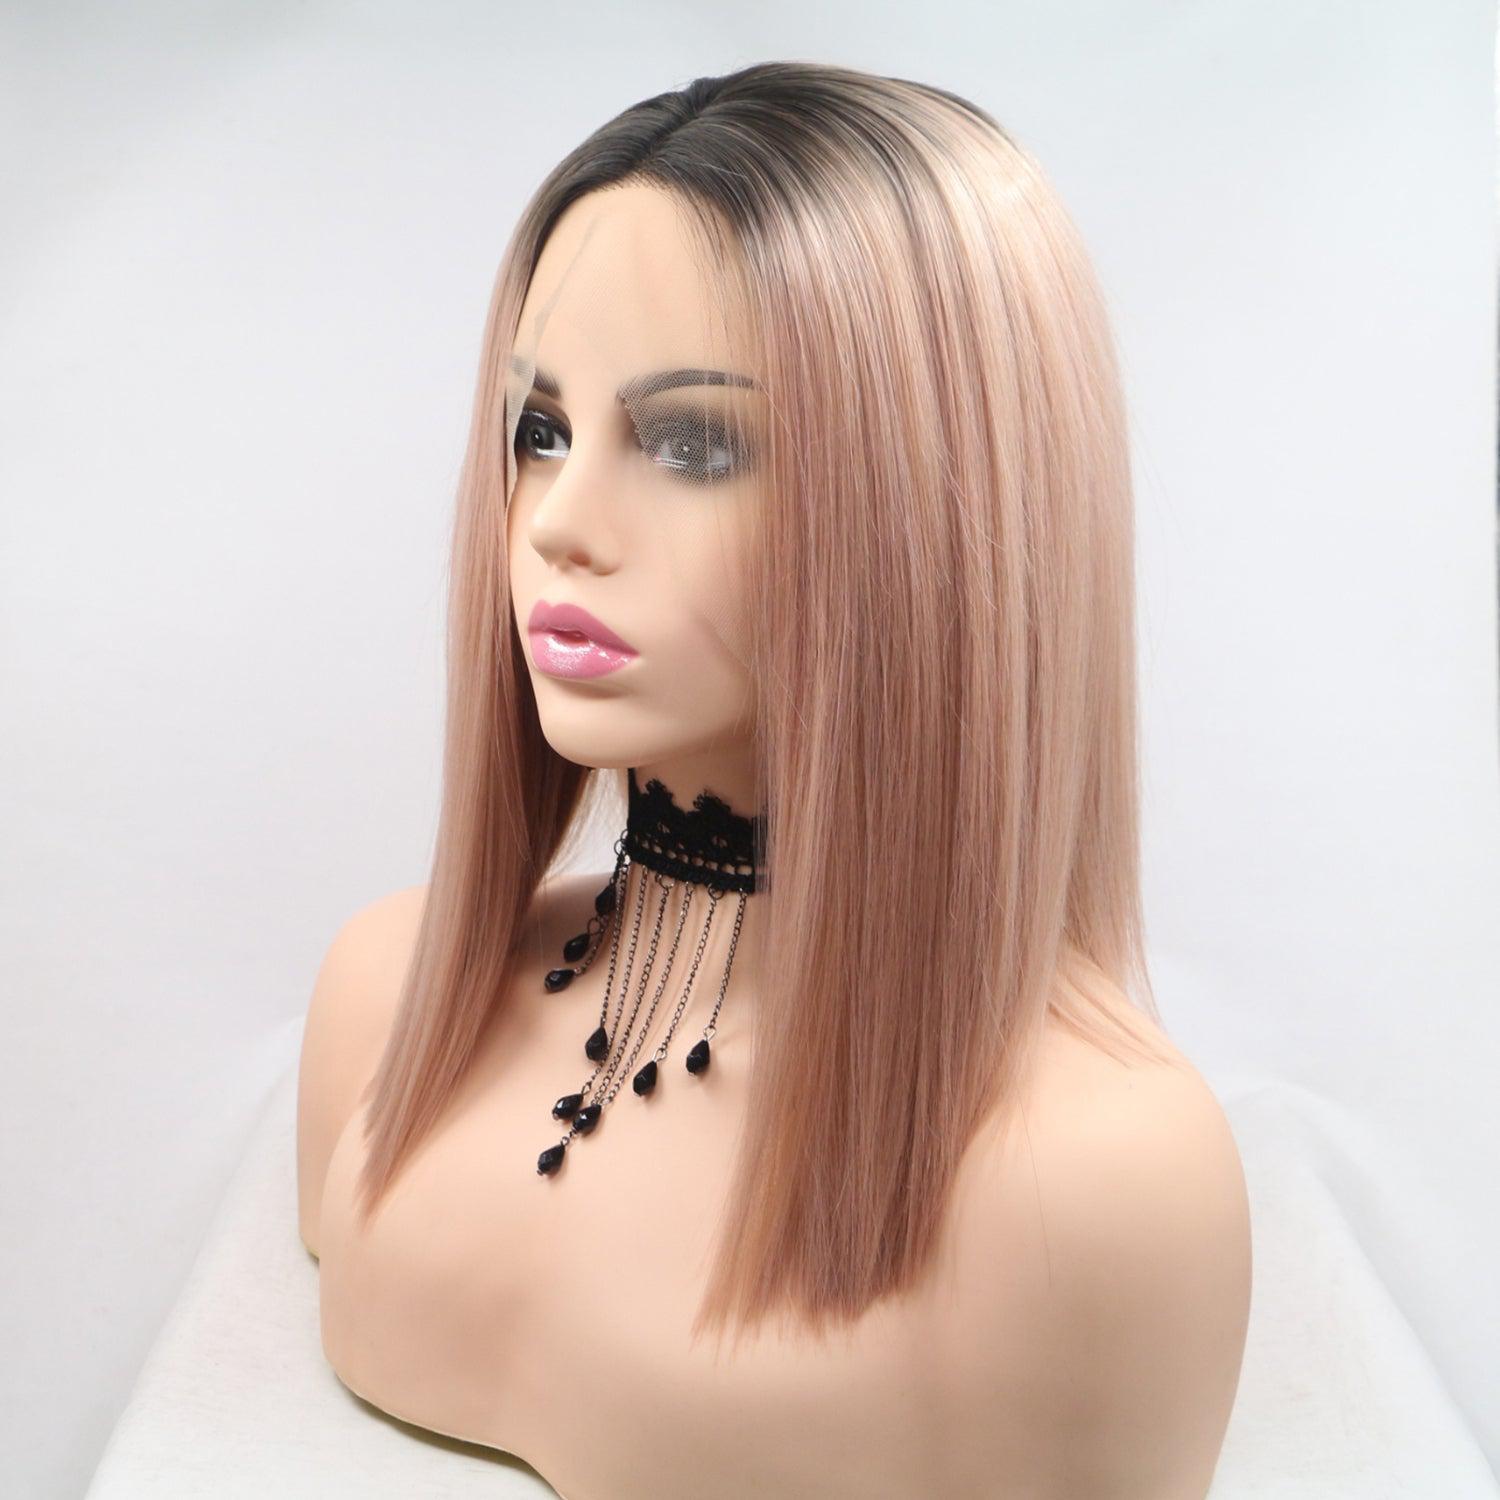 a mannequin head with a pink wig and necklace